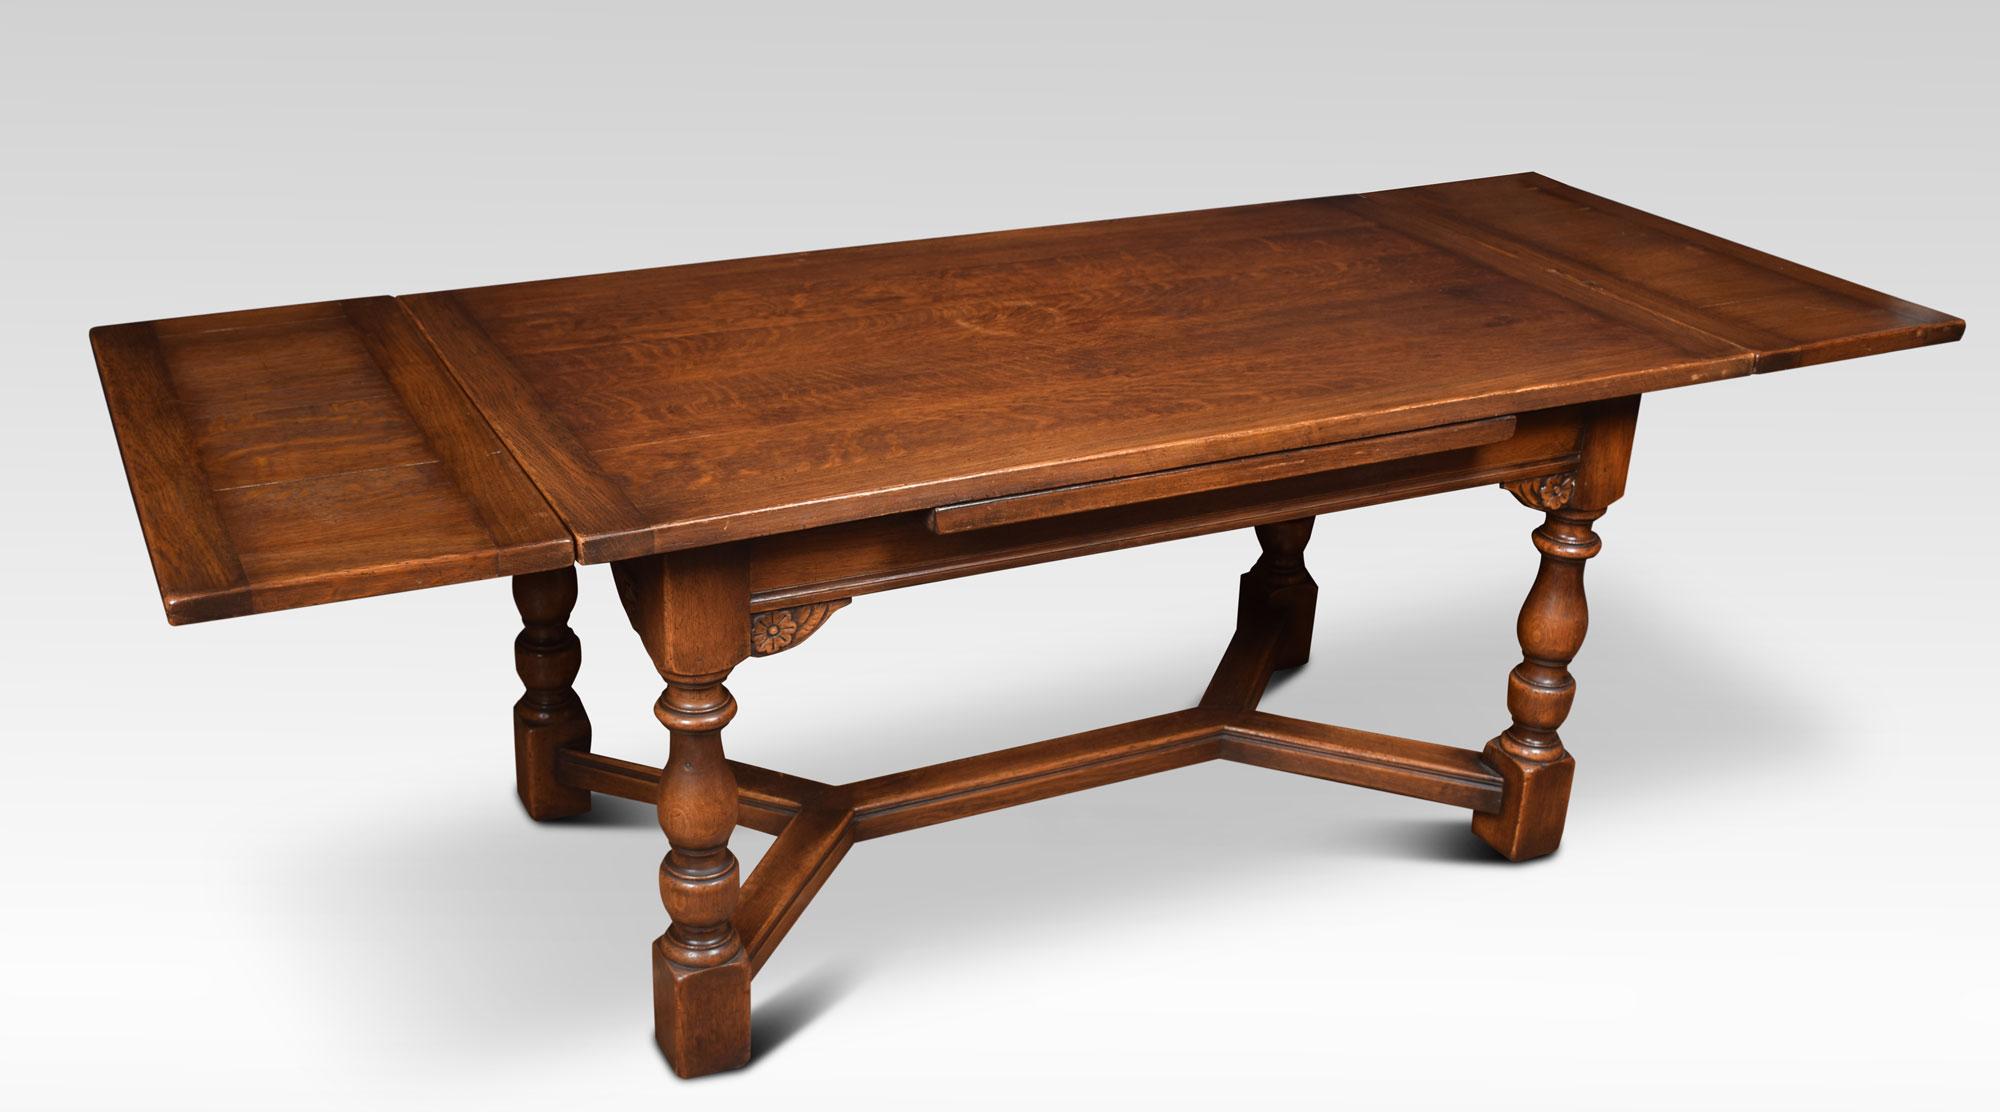 Oak draw leaf refectory table, the rectangular solid oak top above two pull out ends, Raised up on turned tapering legs joined by a double Y-shaped stretcher.
Dimensions
Height 30 inches
Width 60 inches when open 90 inches
Depth 33 inches.